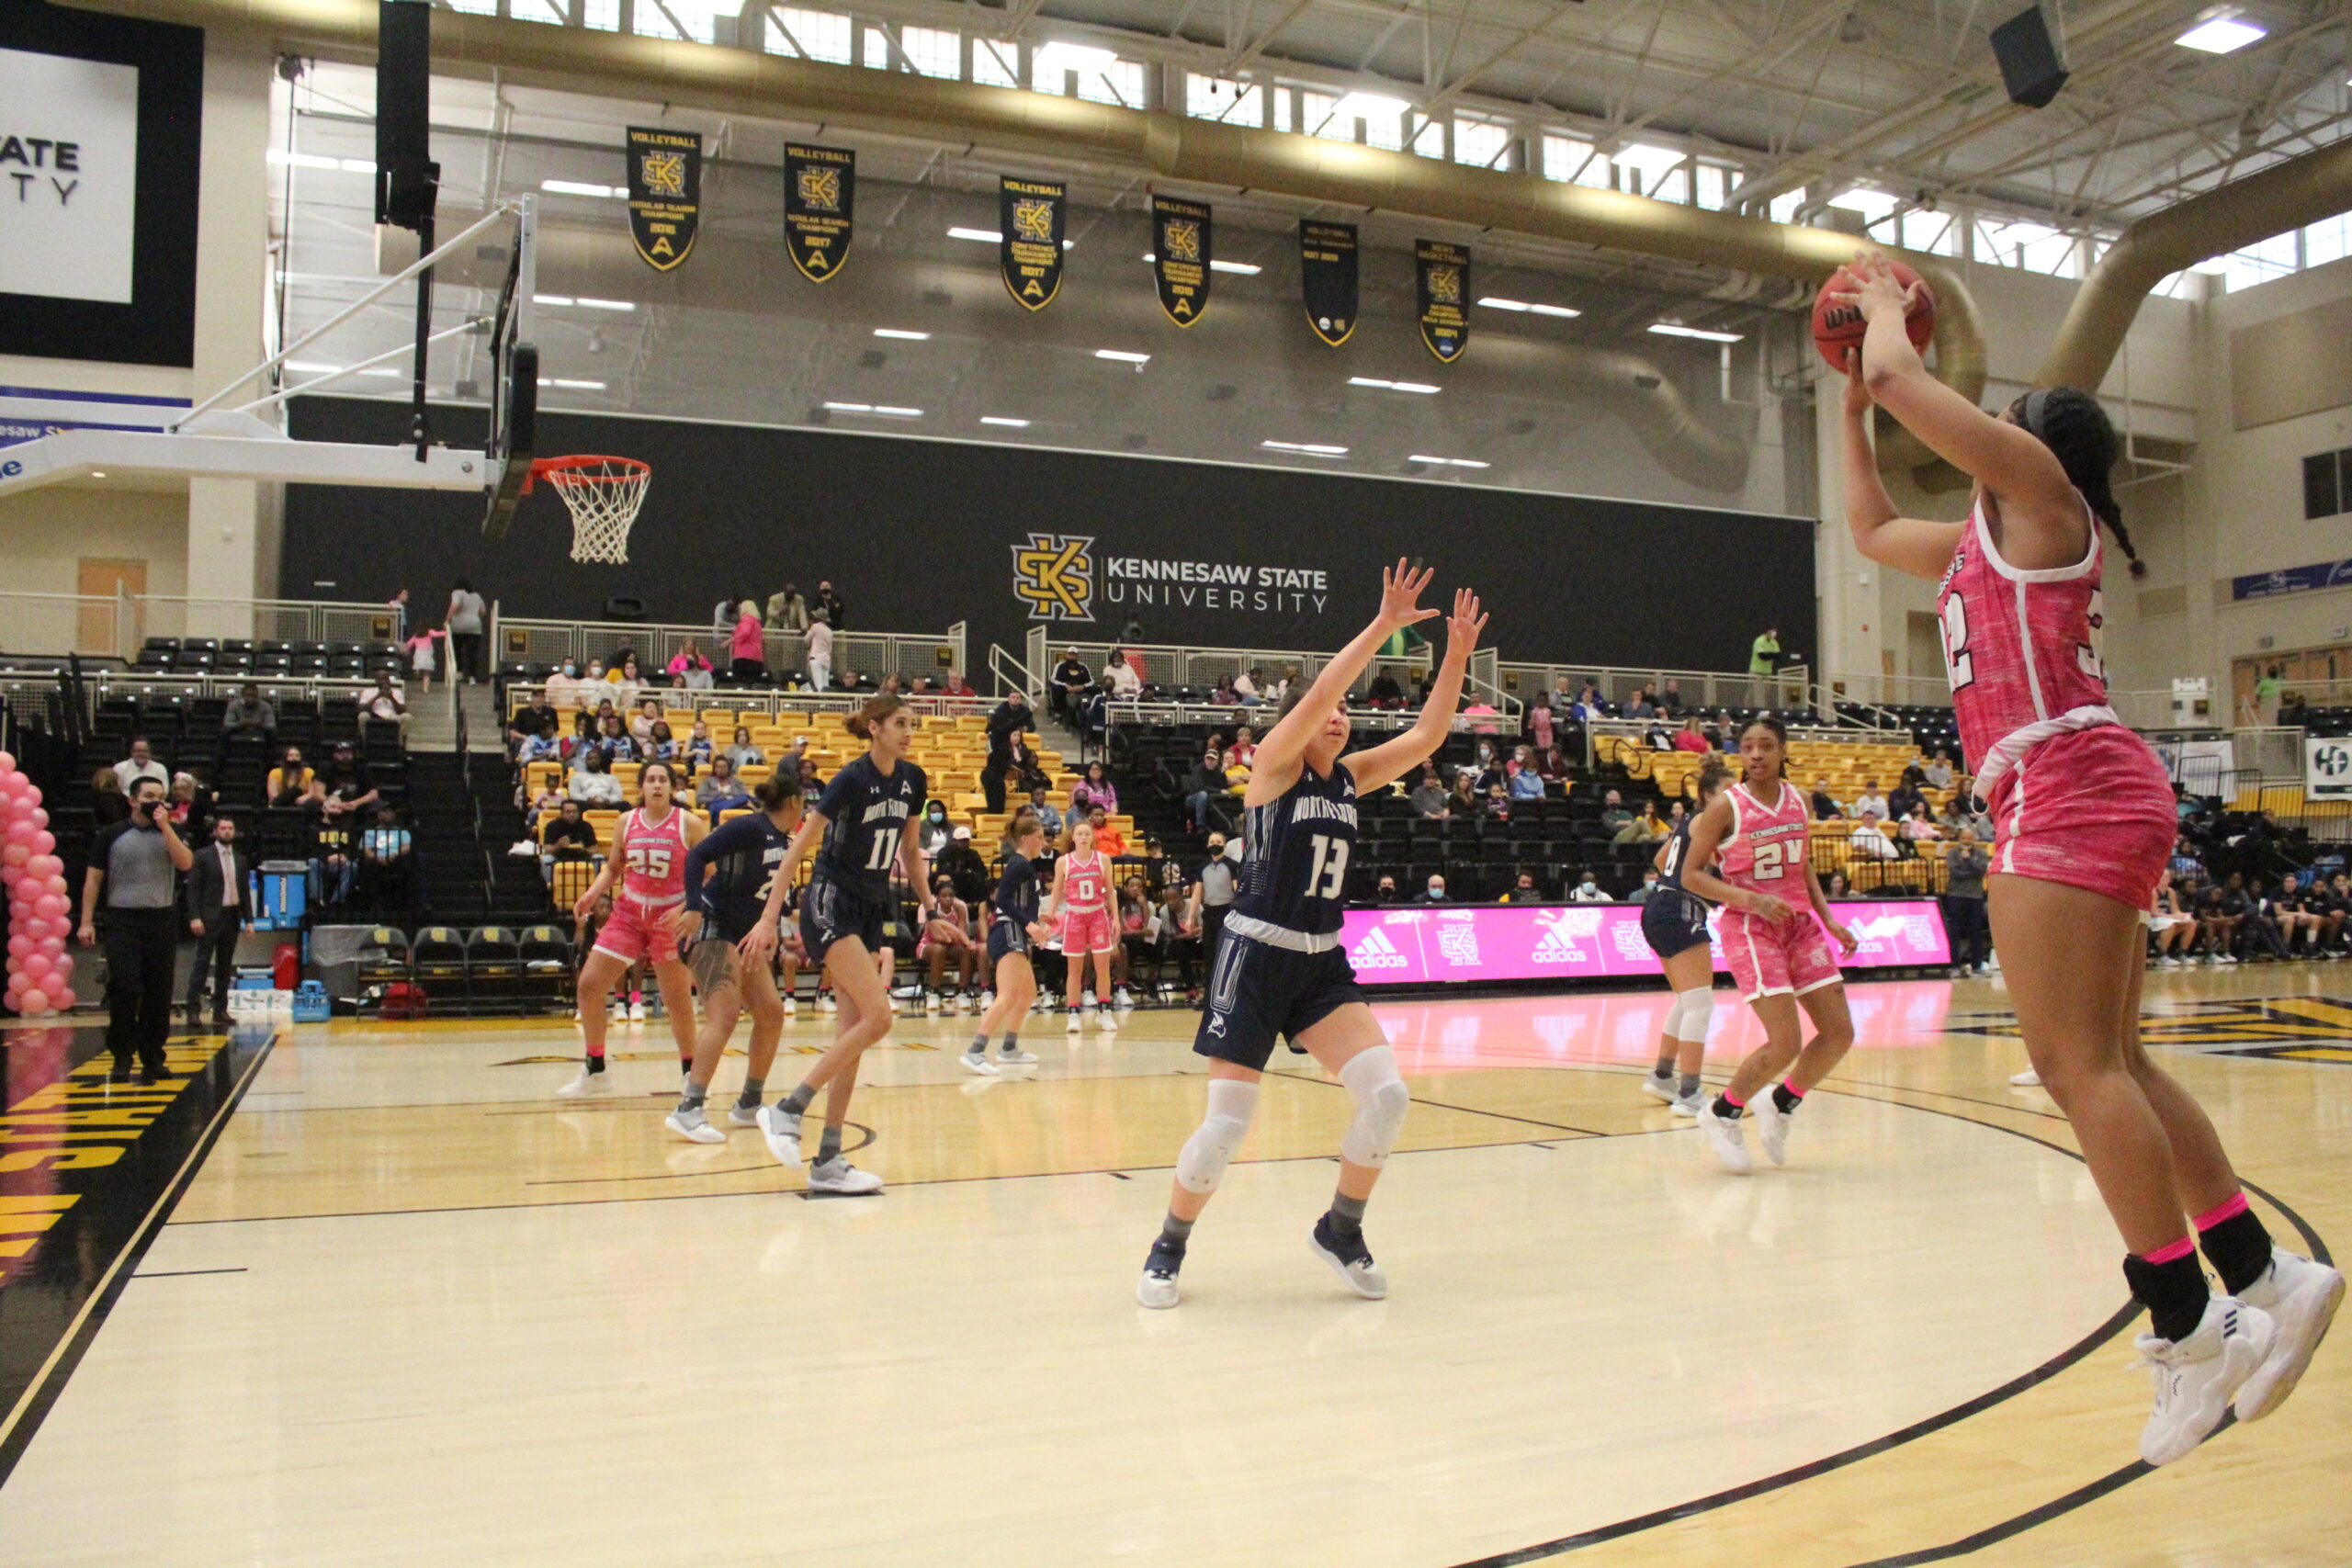 The Kennesaw State University lady owl basketball players won their game against North Florida on last Saturday, February 12th. Photo taken by Julia Walsh.